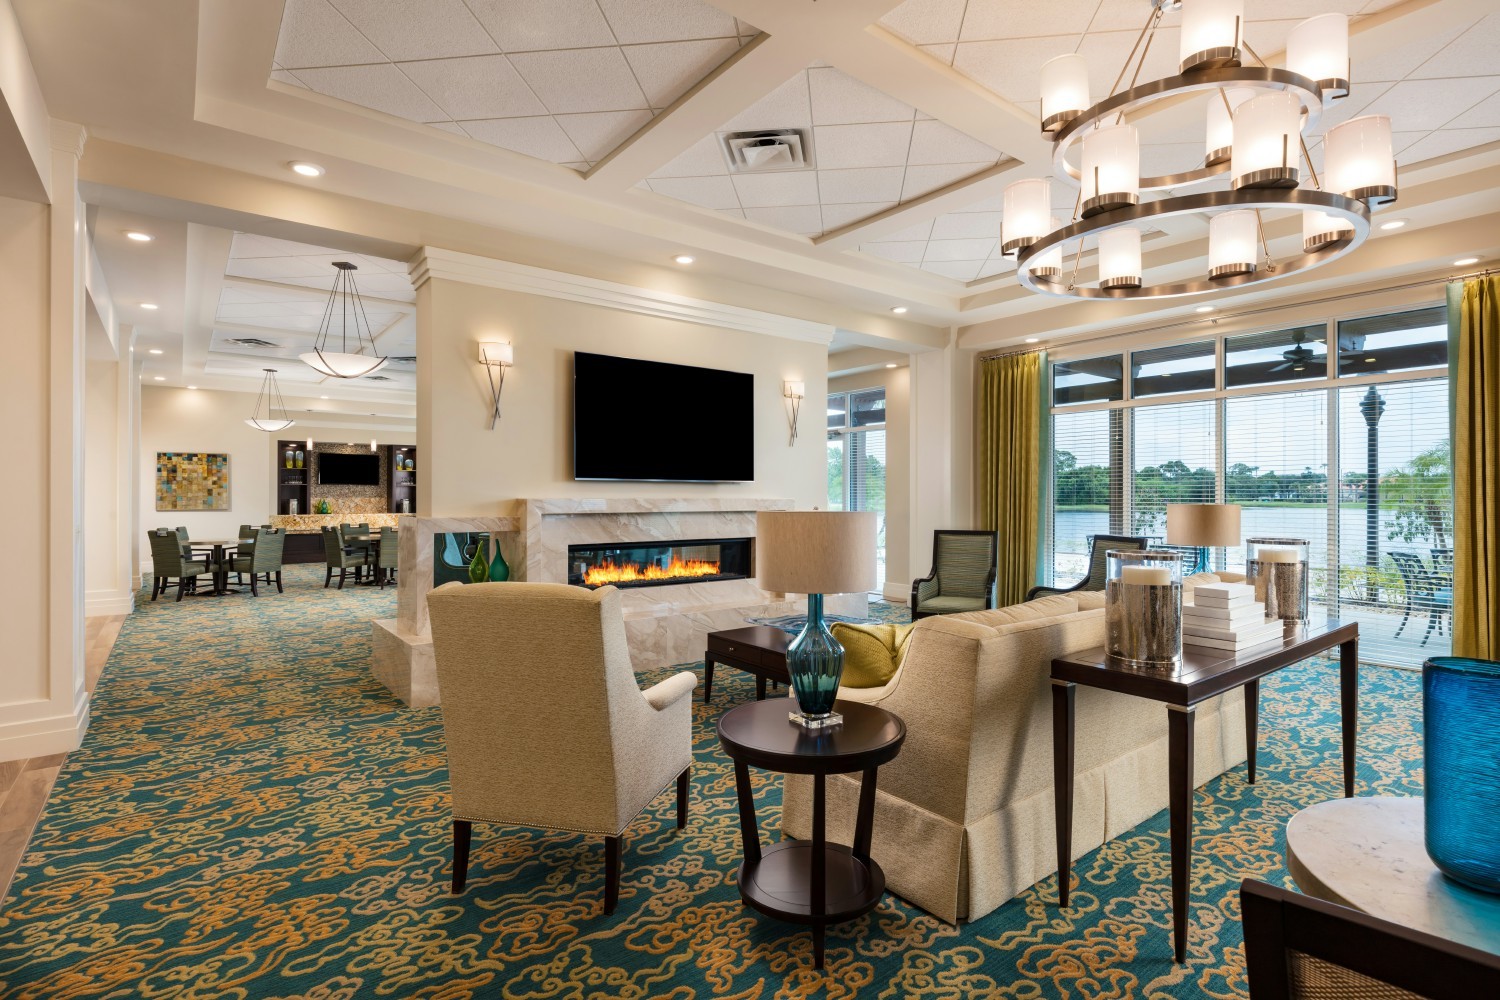 Our beautiful living room at Watercrest Port St. Lucie.